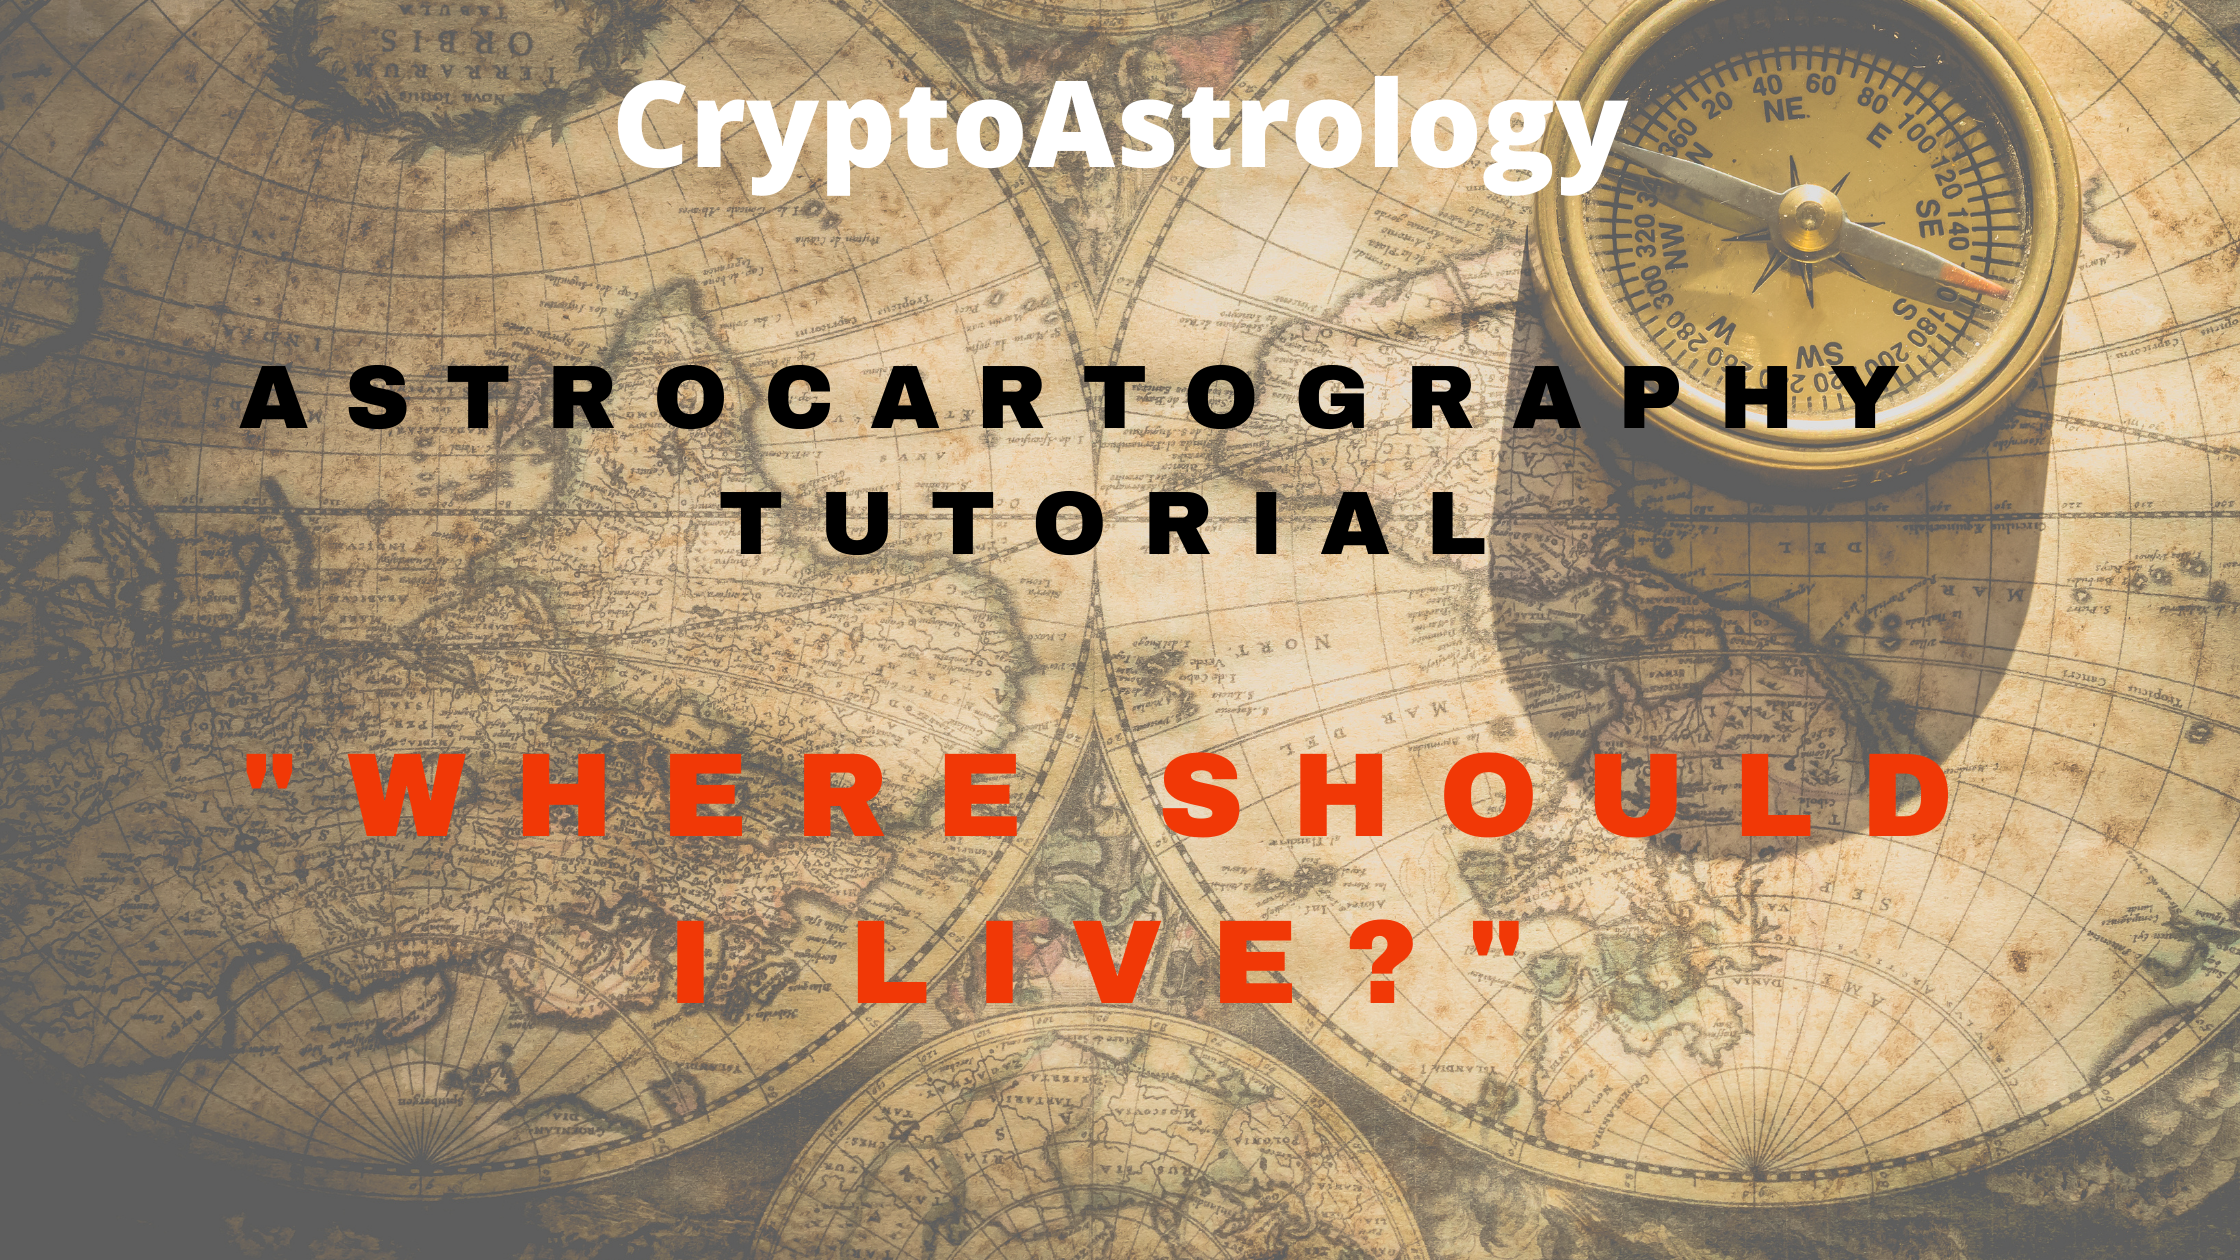 Where Should I Live? AstroCartography Tutorial